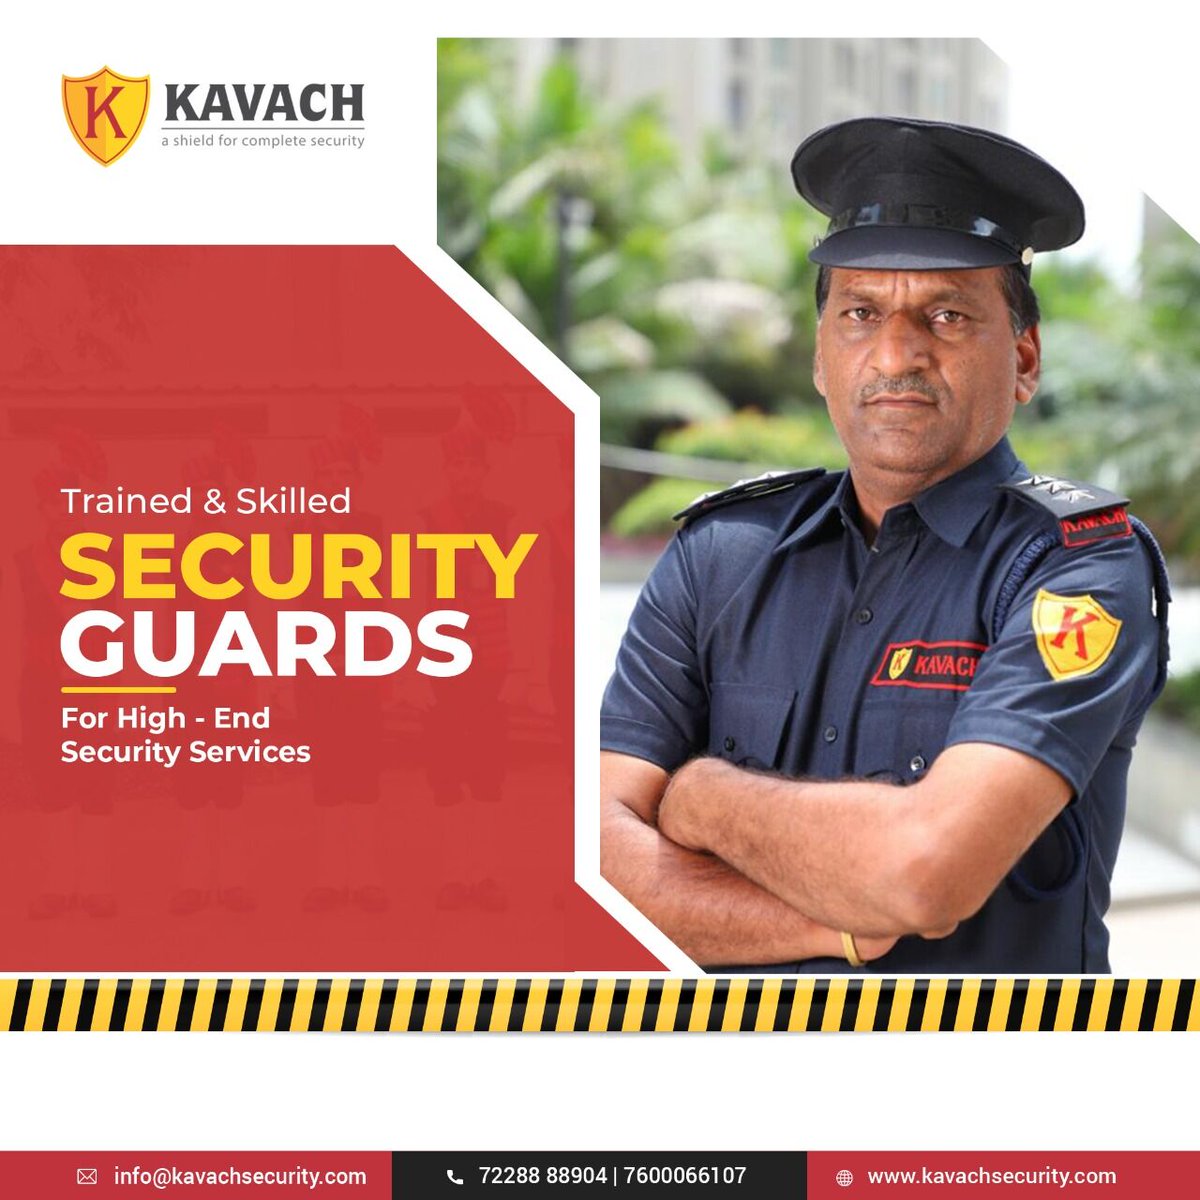 Let's put safety first! 
Kavach Global Konnects Pvt Ltd

Call: +91 9898144606, +91 7228888904
Website: bit.ly/3Ycdt8S

#securityguardservices #securitytraining #training #bodyguards #Kavach #securityservices #securitysolutions #securityconsulting